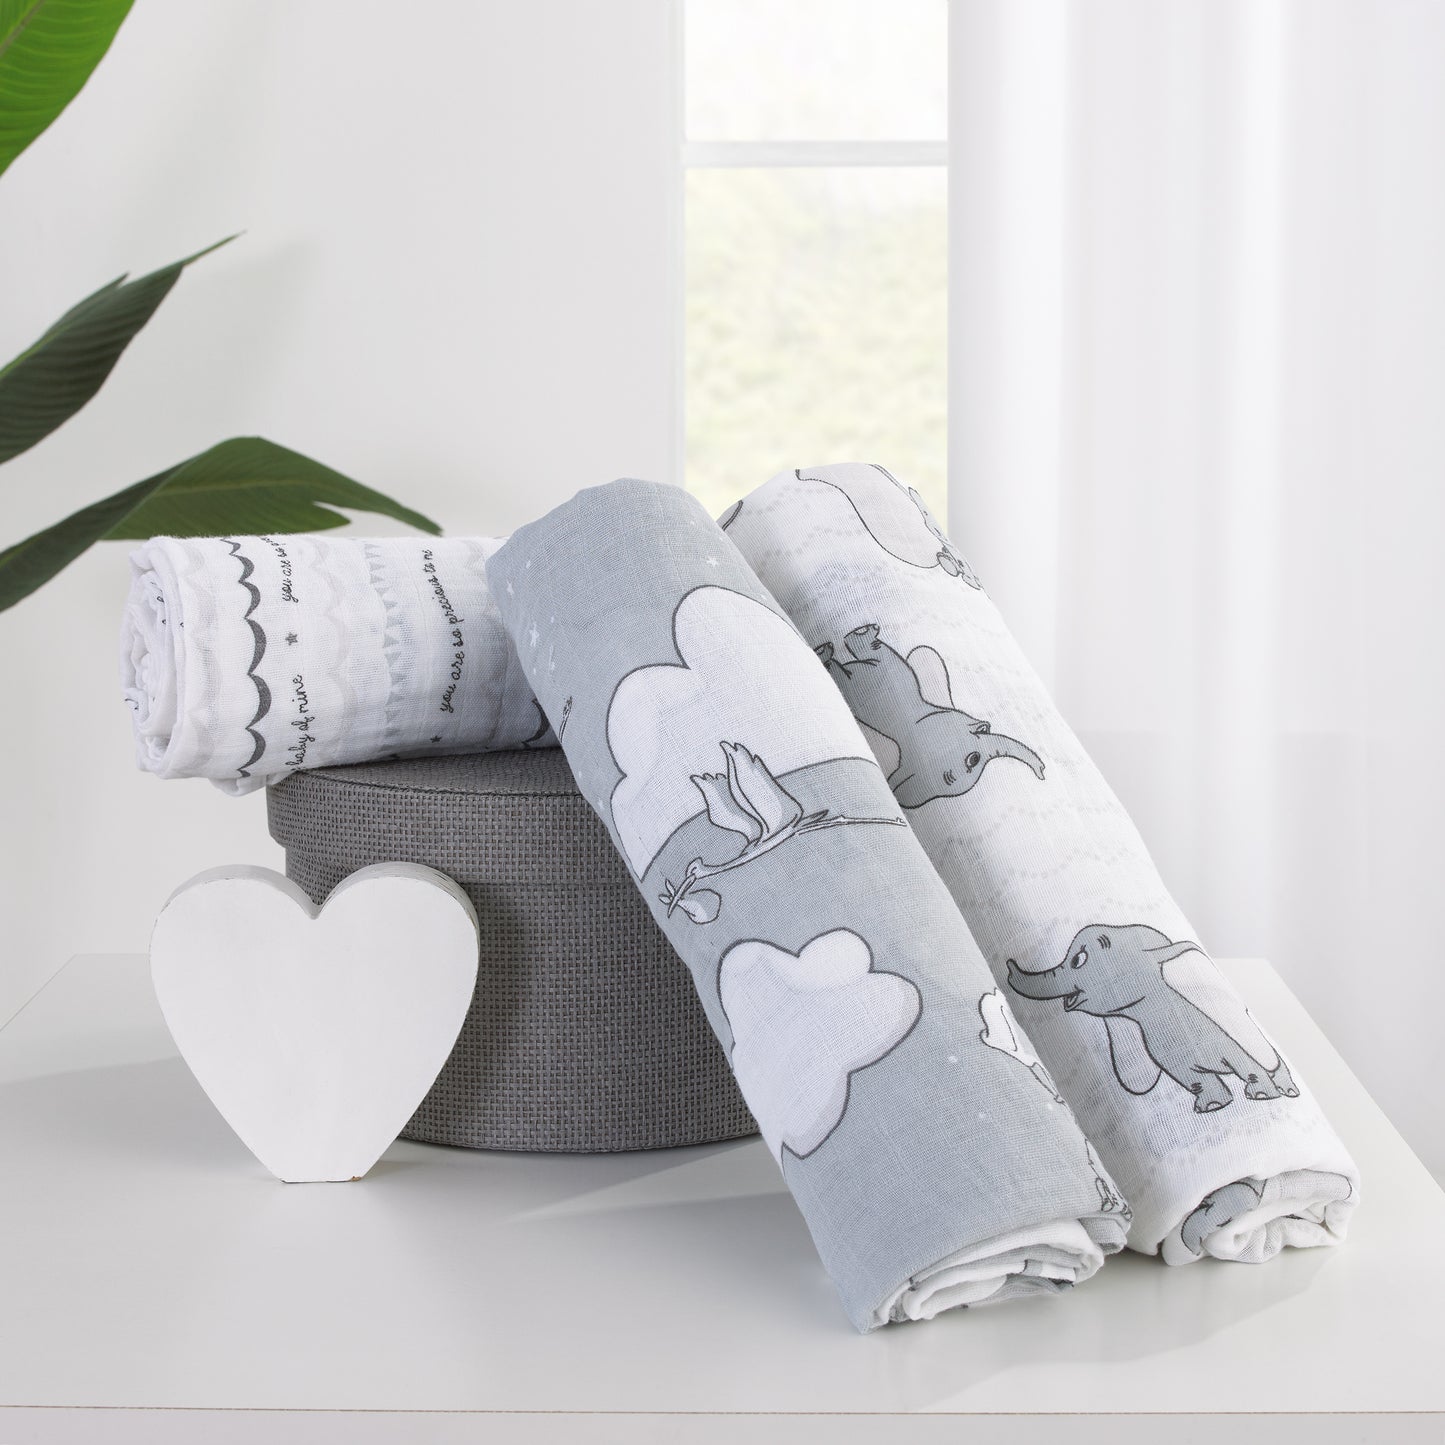 Disney Dumbo Gray and White 3 Piece Muslin Swaddle Baby Blanket Set